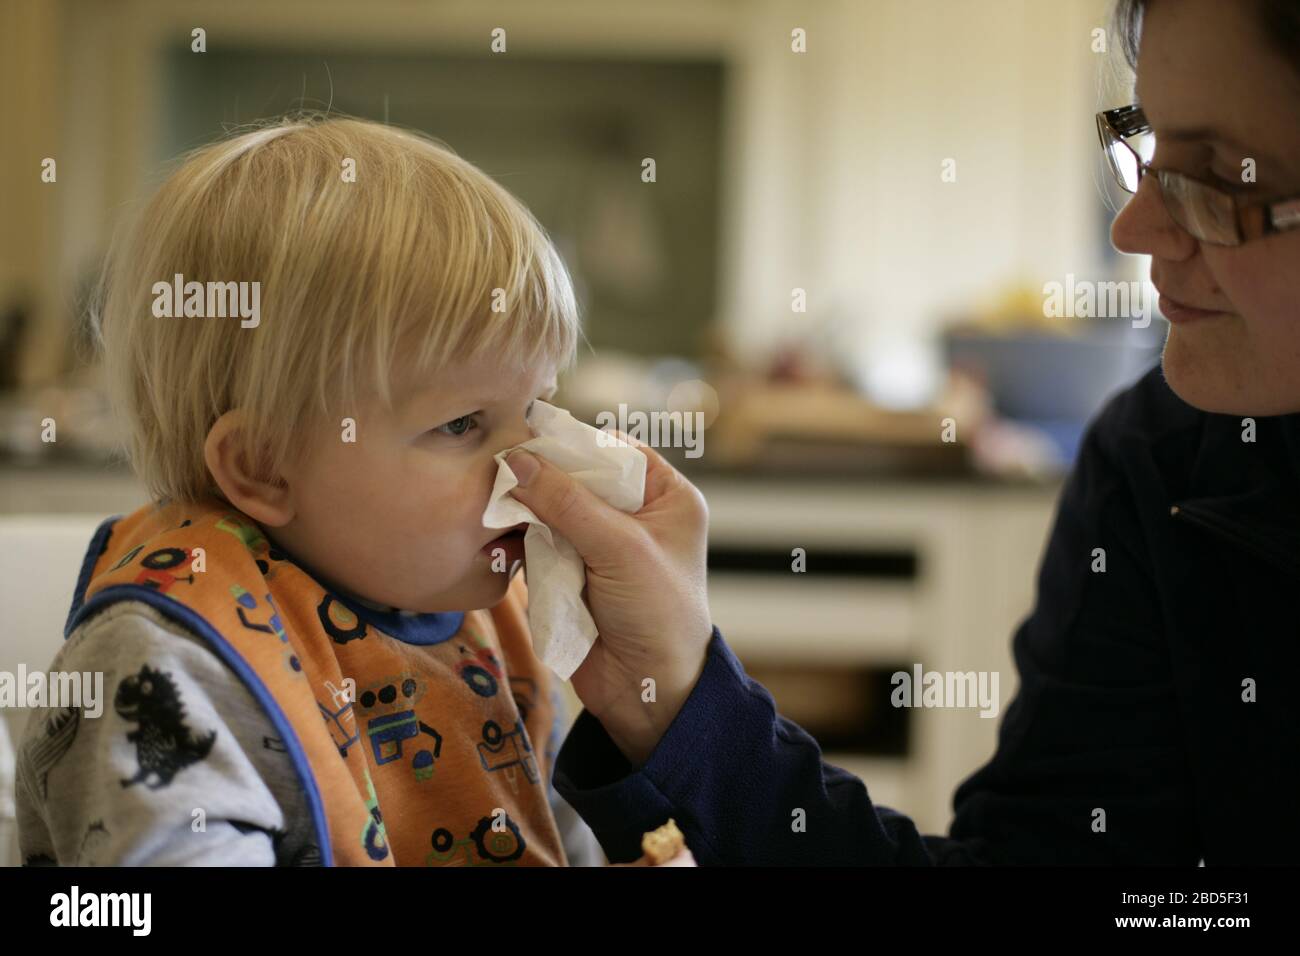 Mother helping child toddler blow nose into tissue during period of self-isolating during the 2020 COVID-19 coronavirus pandemic Stock Photo